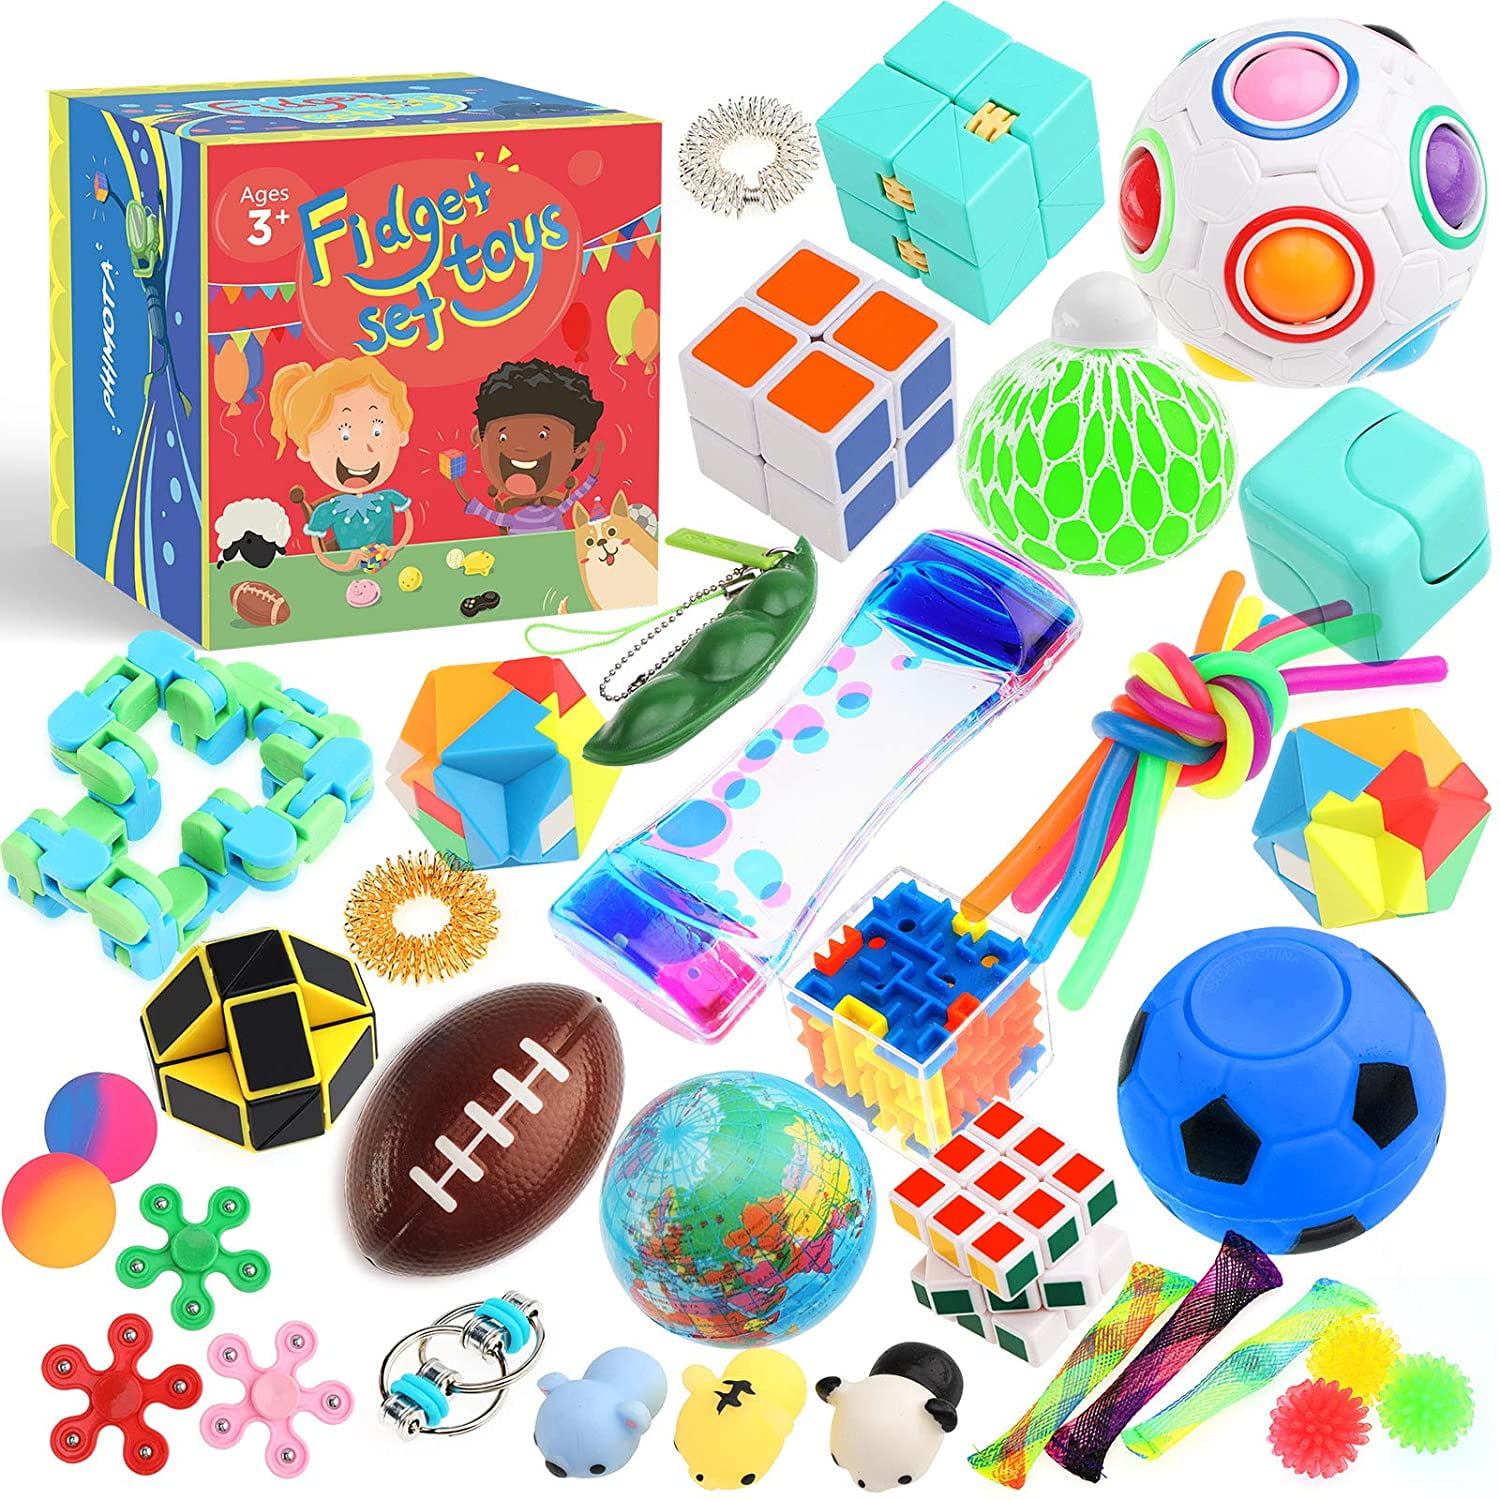 Details about   Fidget Sensory Toys Set 50 Pack For Stress Relief Anti-Anxiety Stocking Hot /